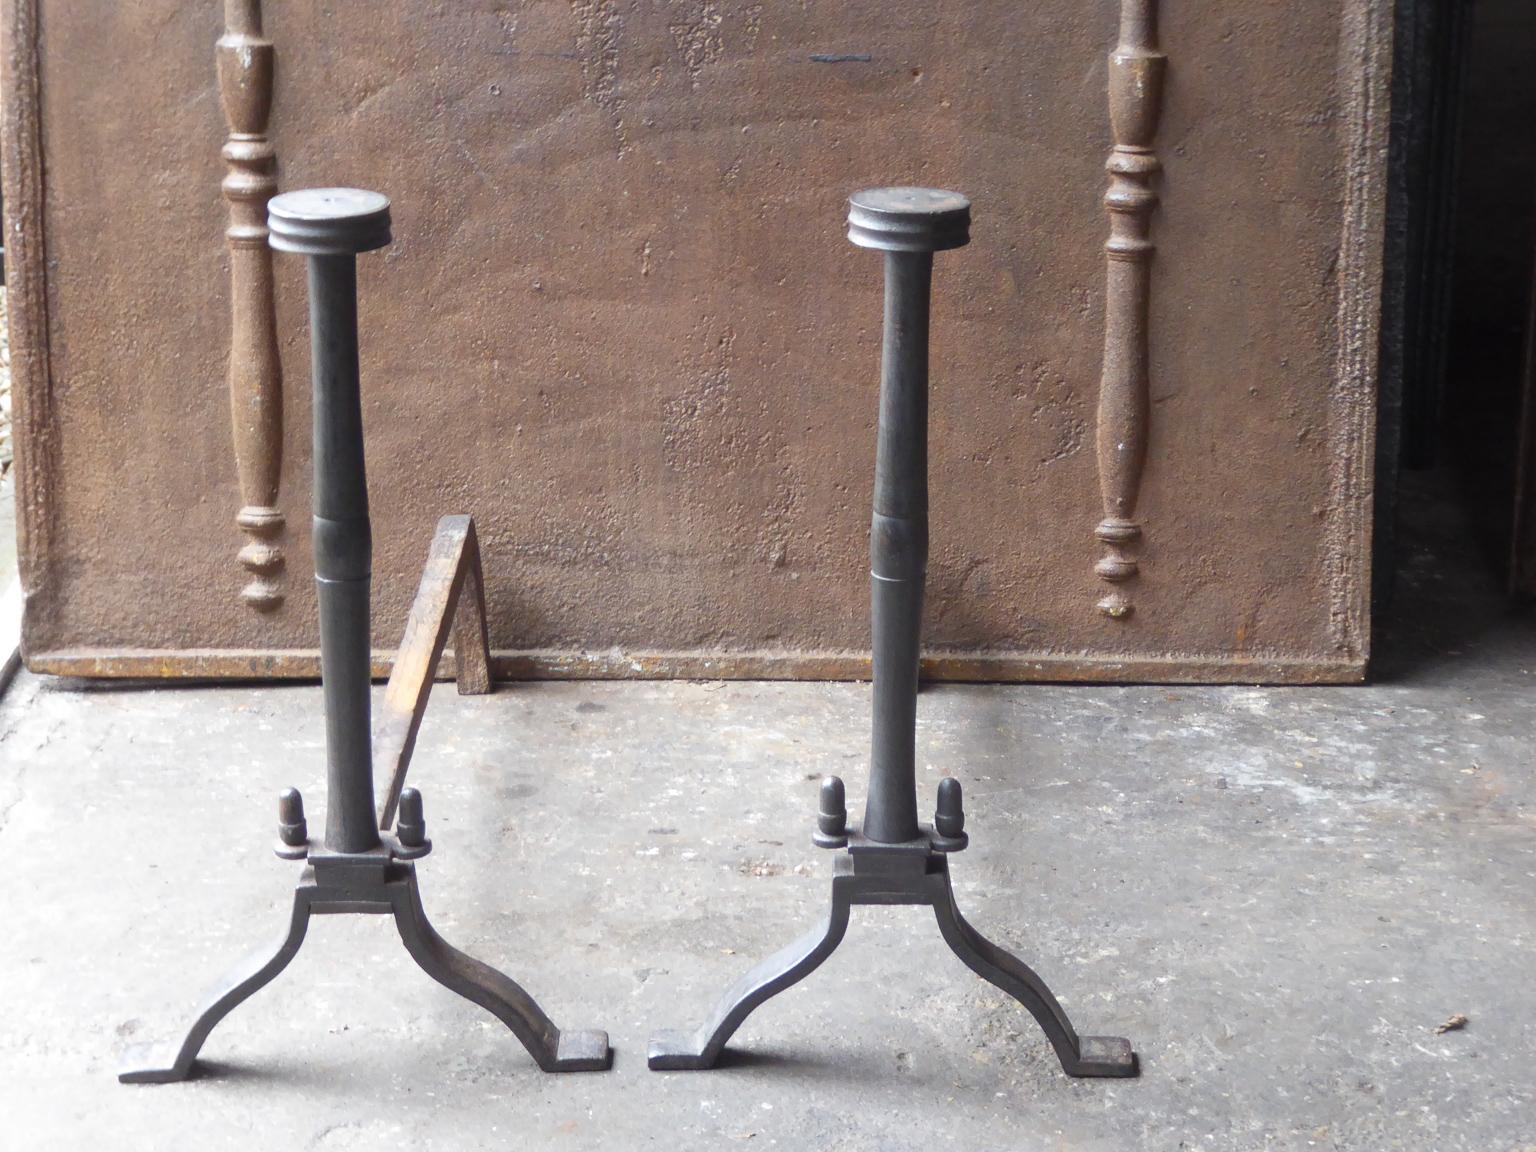 Large 19th-20th century French Napoleon III style andirons. The andirons are made of wrought iron and have a black / pewter patina. The condition is good.







   